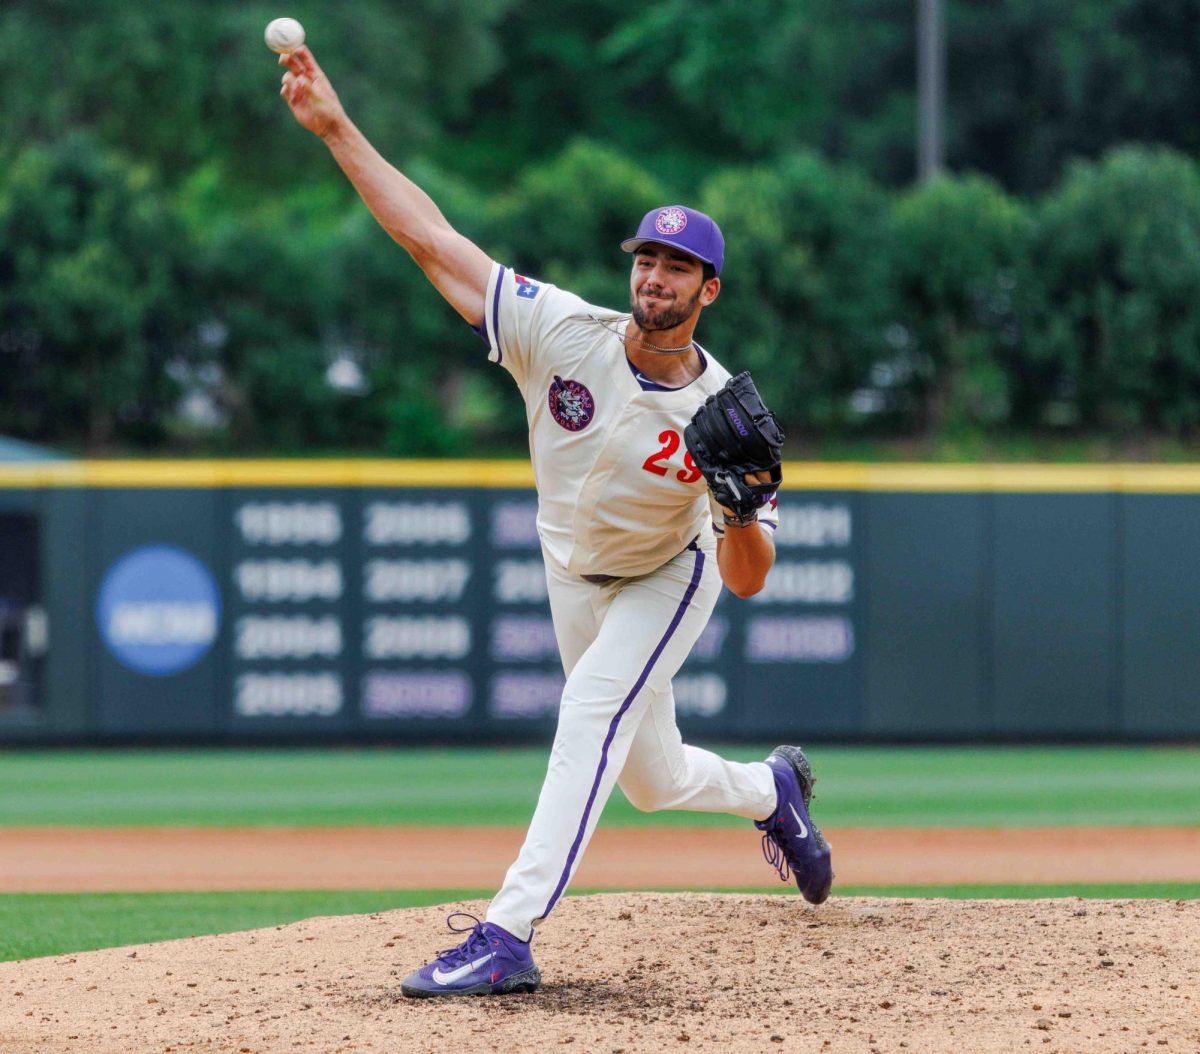 TCU pitcher Mason Bixby pitches a pitch at Lupton Stadium in Fort Worth, Texas on April 27th, 2024. The TCU Horned Frogs fell to the Kansas State Wildcats 6-3 in game 2 of the doubleheader. (TCU360/ Tyler Chan)